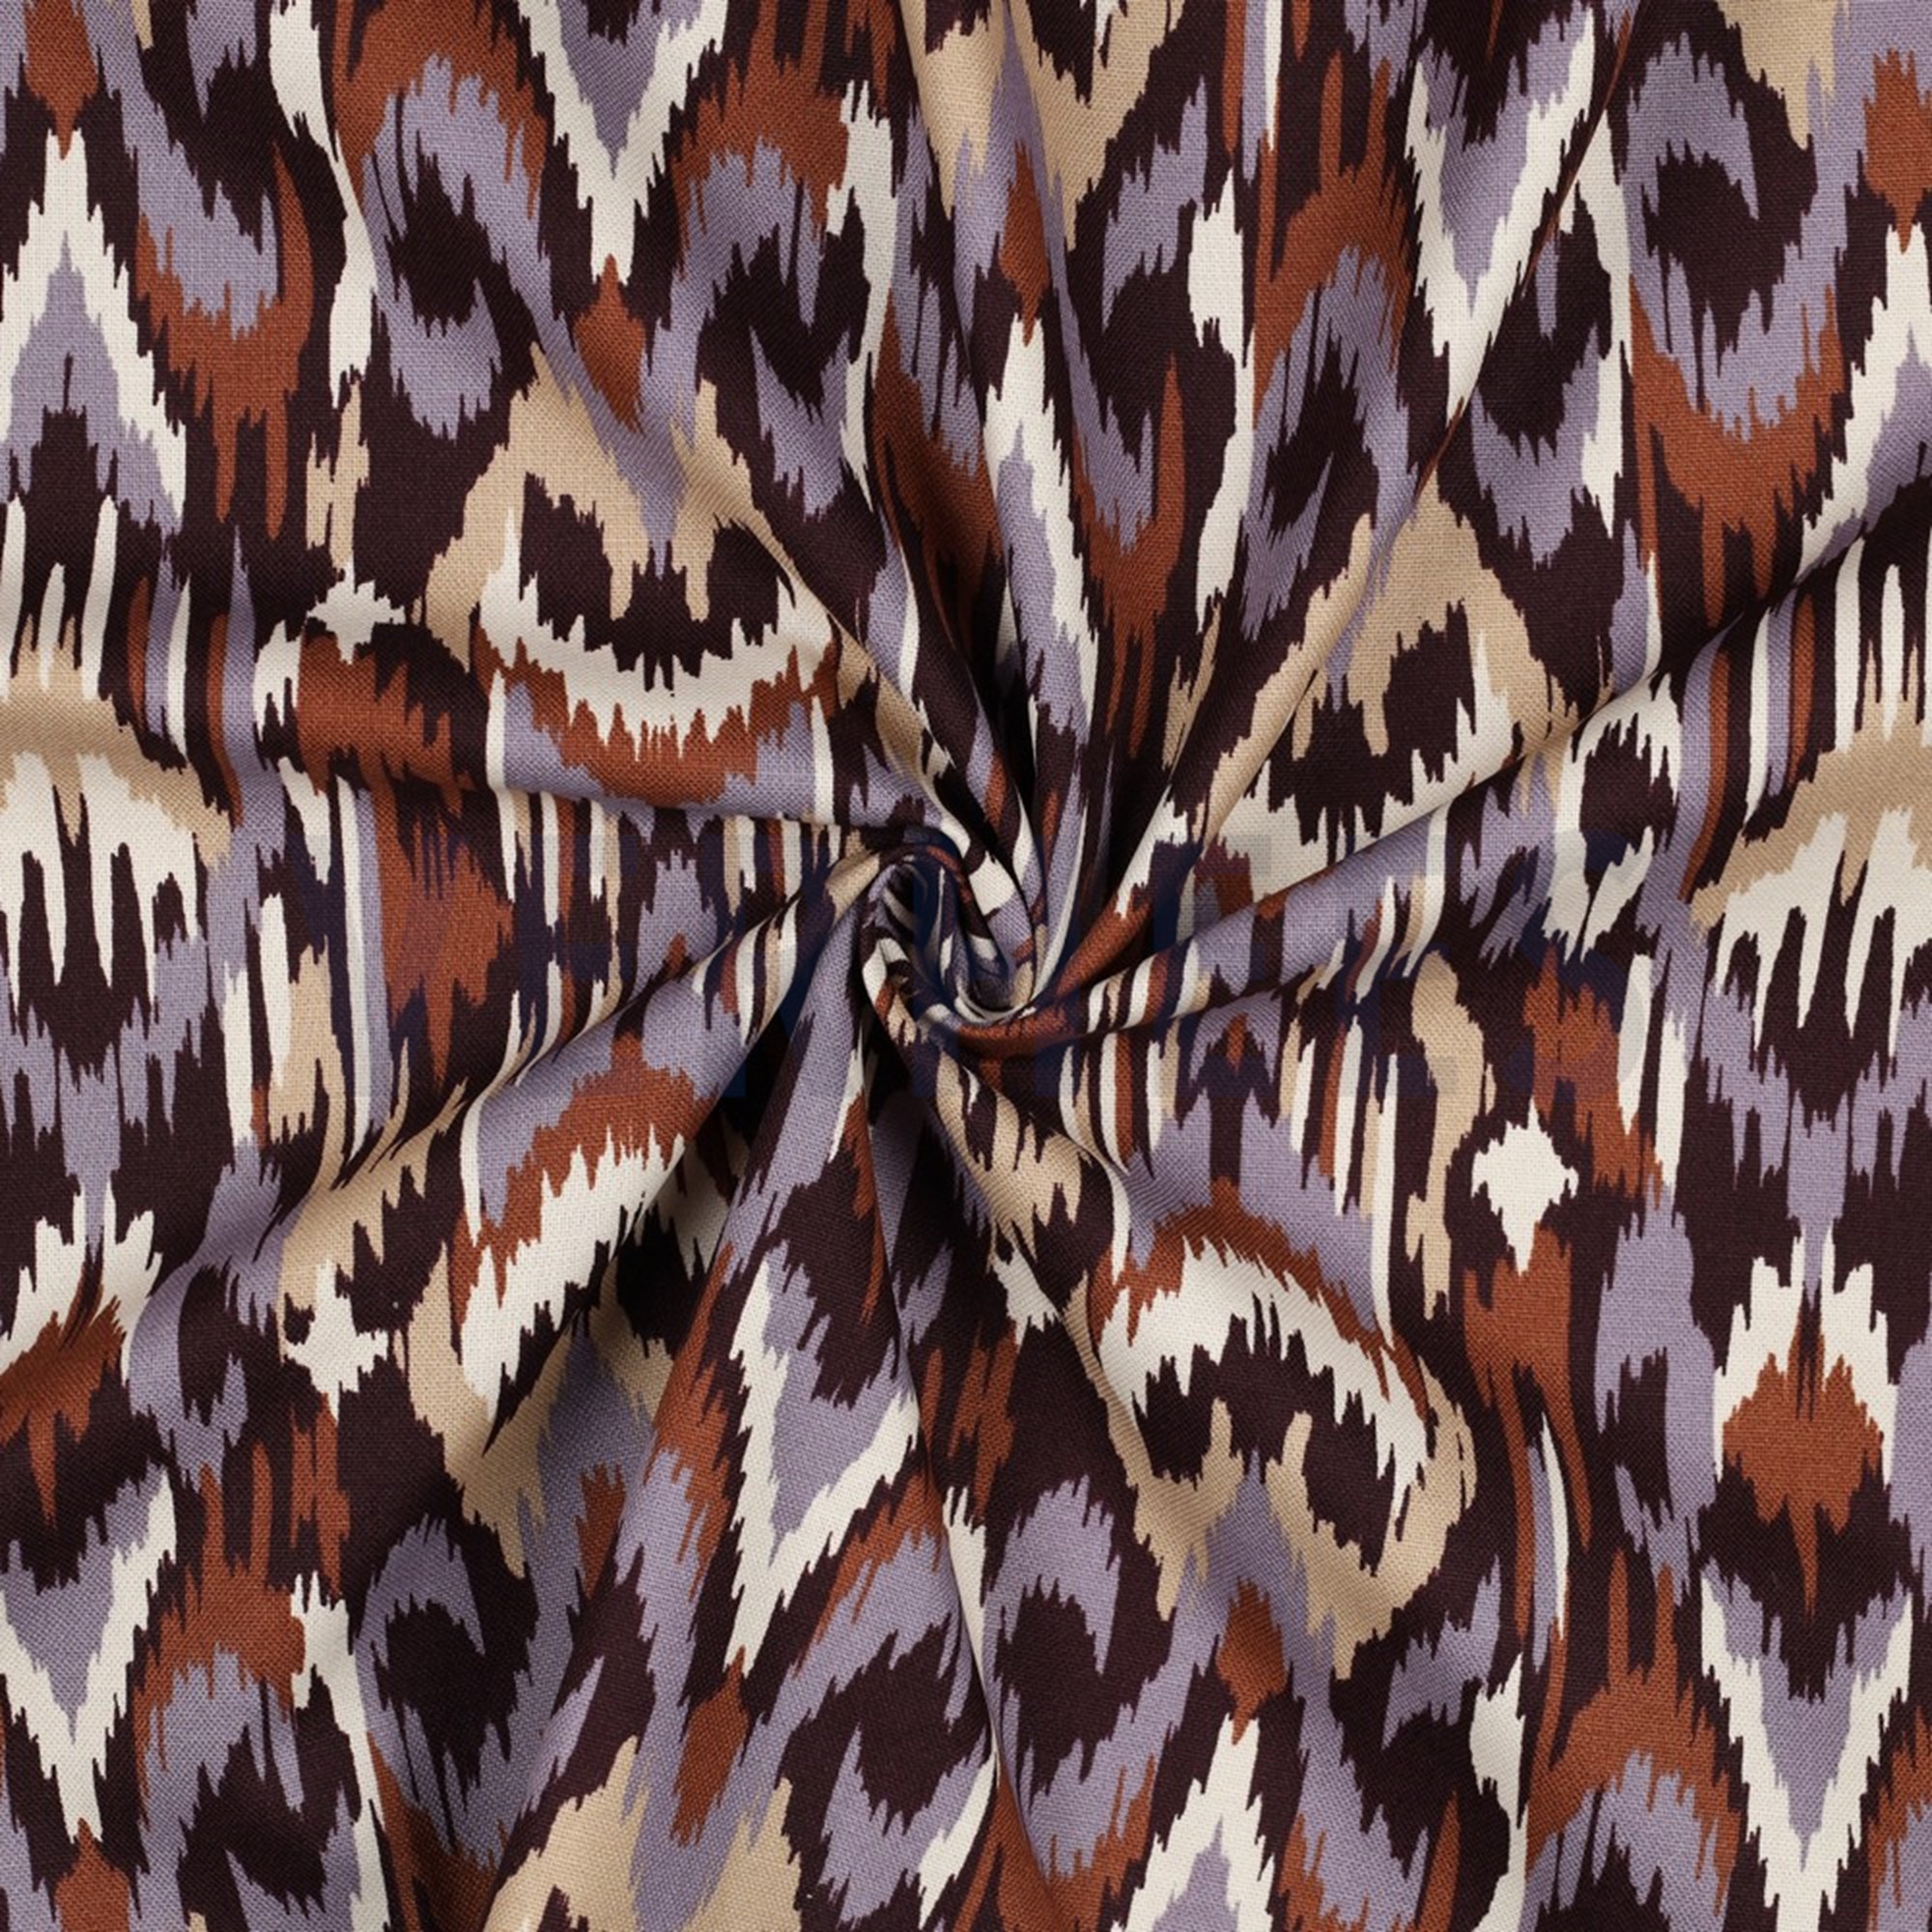 CANVAS ABSTRACT AUBERGINE (high resolution) #2